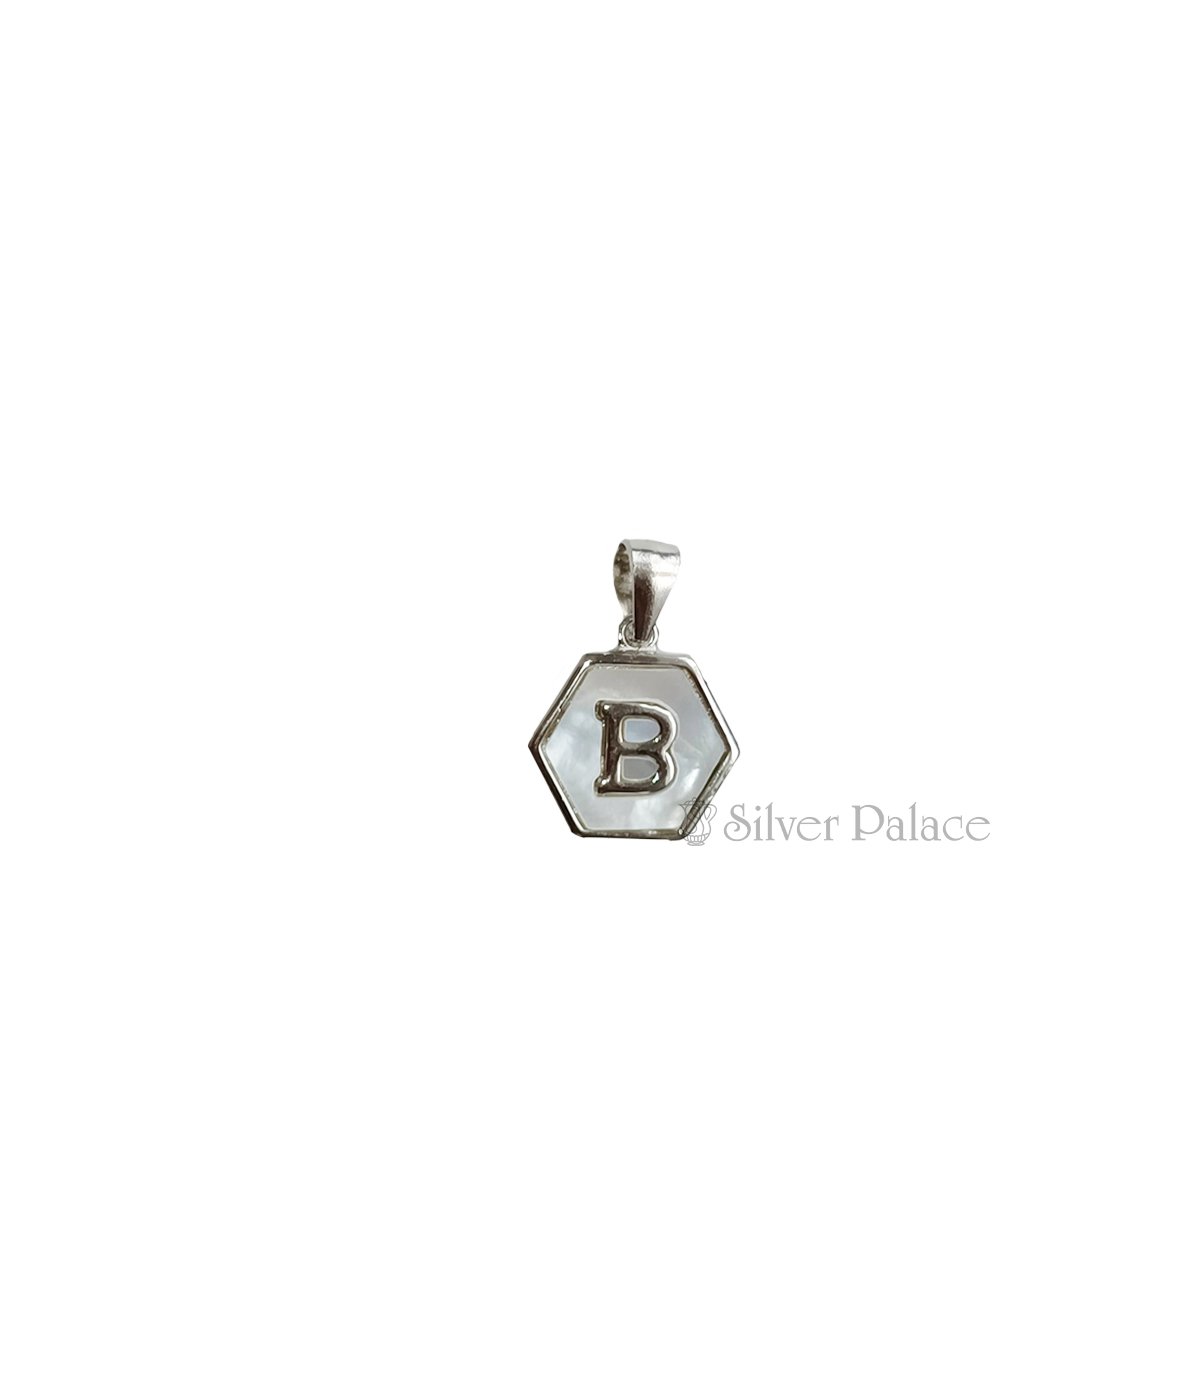 92.5 STERLING SILVER INITIAL LETTER B PENDANT